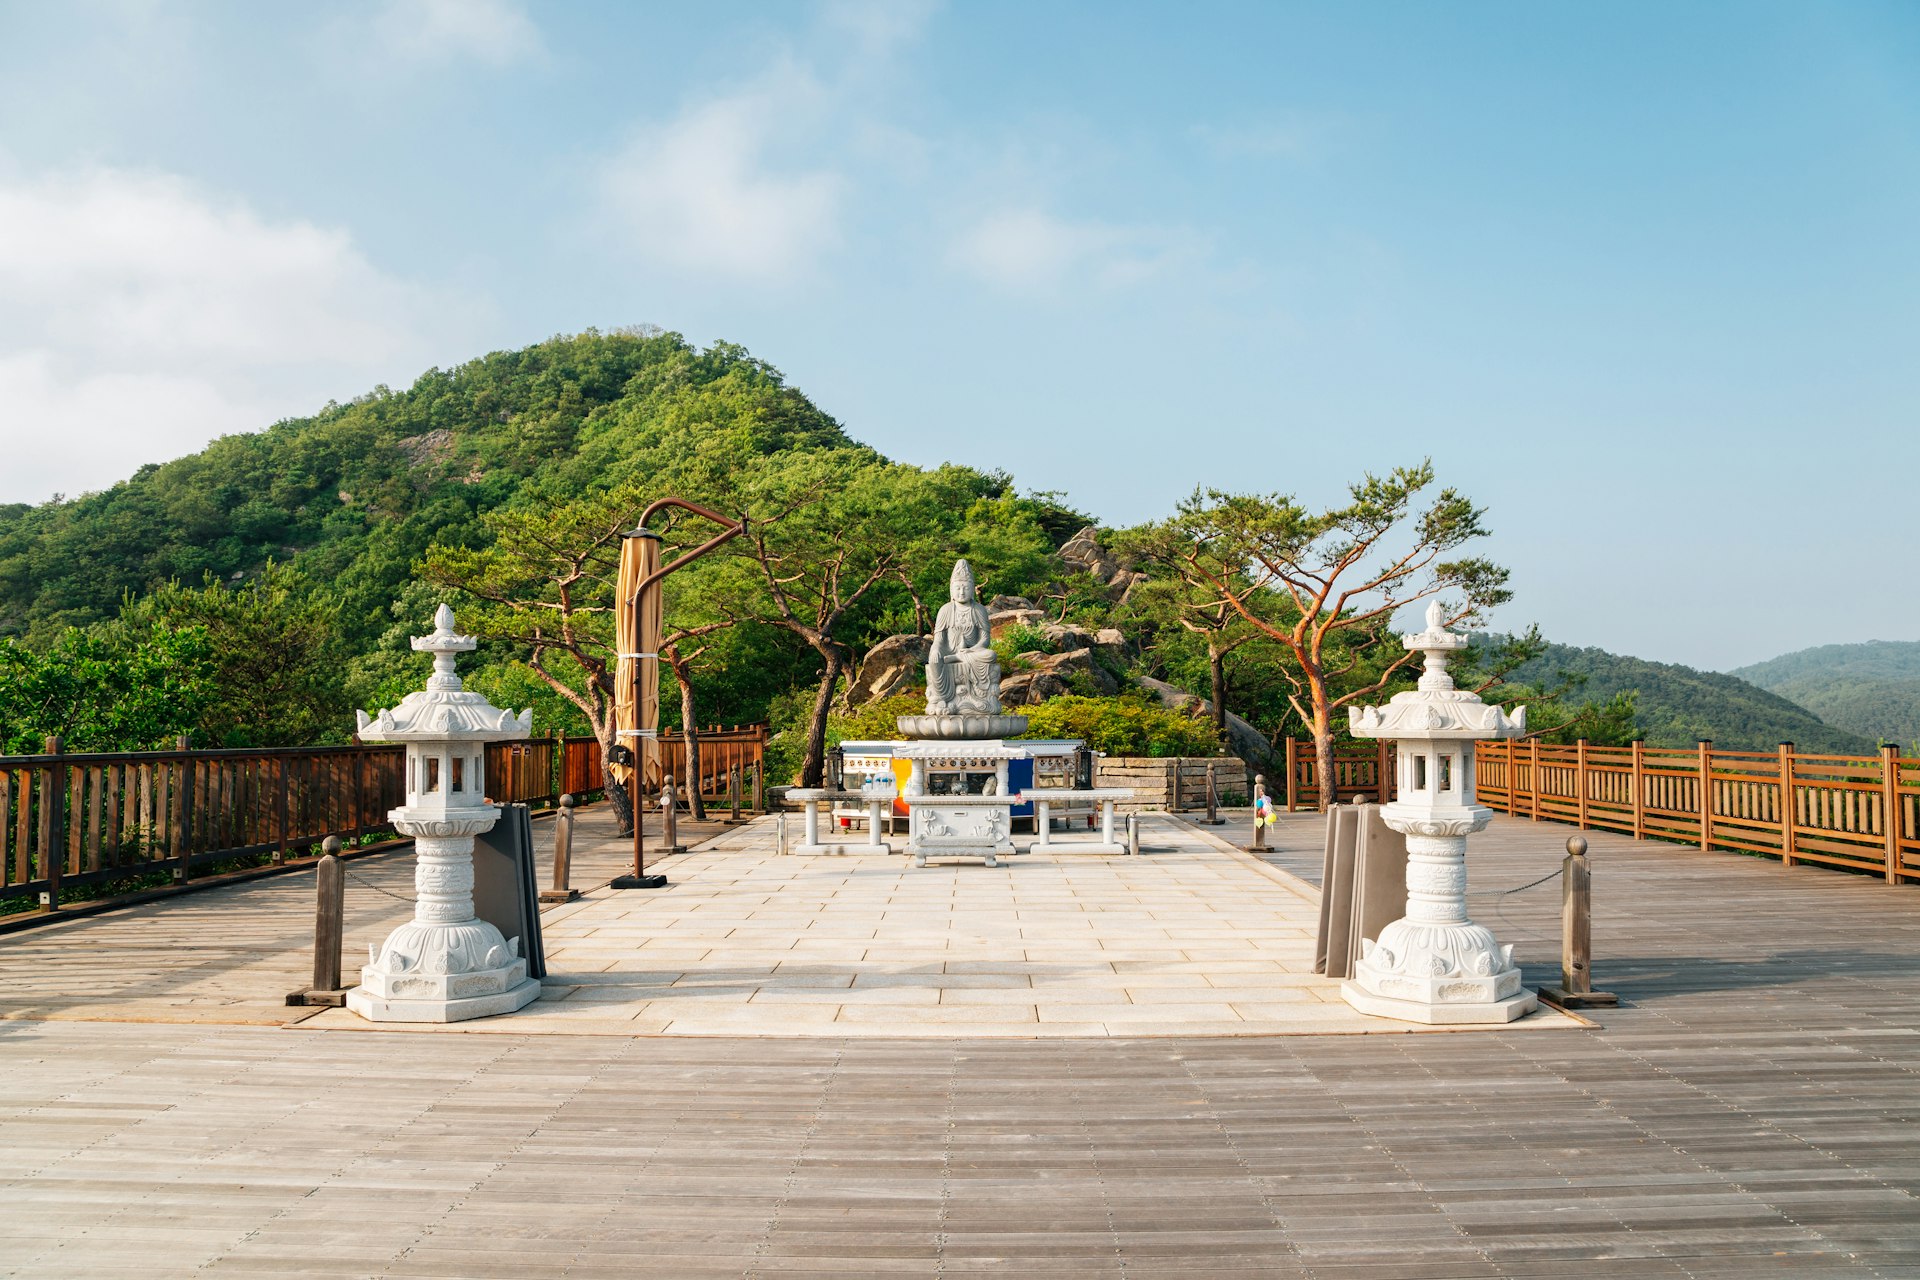 A statue of Buddha stands in a stone courtyard surrounded by hilltops that are covered in forest at Goryeosan mountain's Jeokseoksa temple in Ganghwado